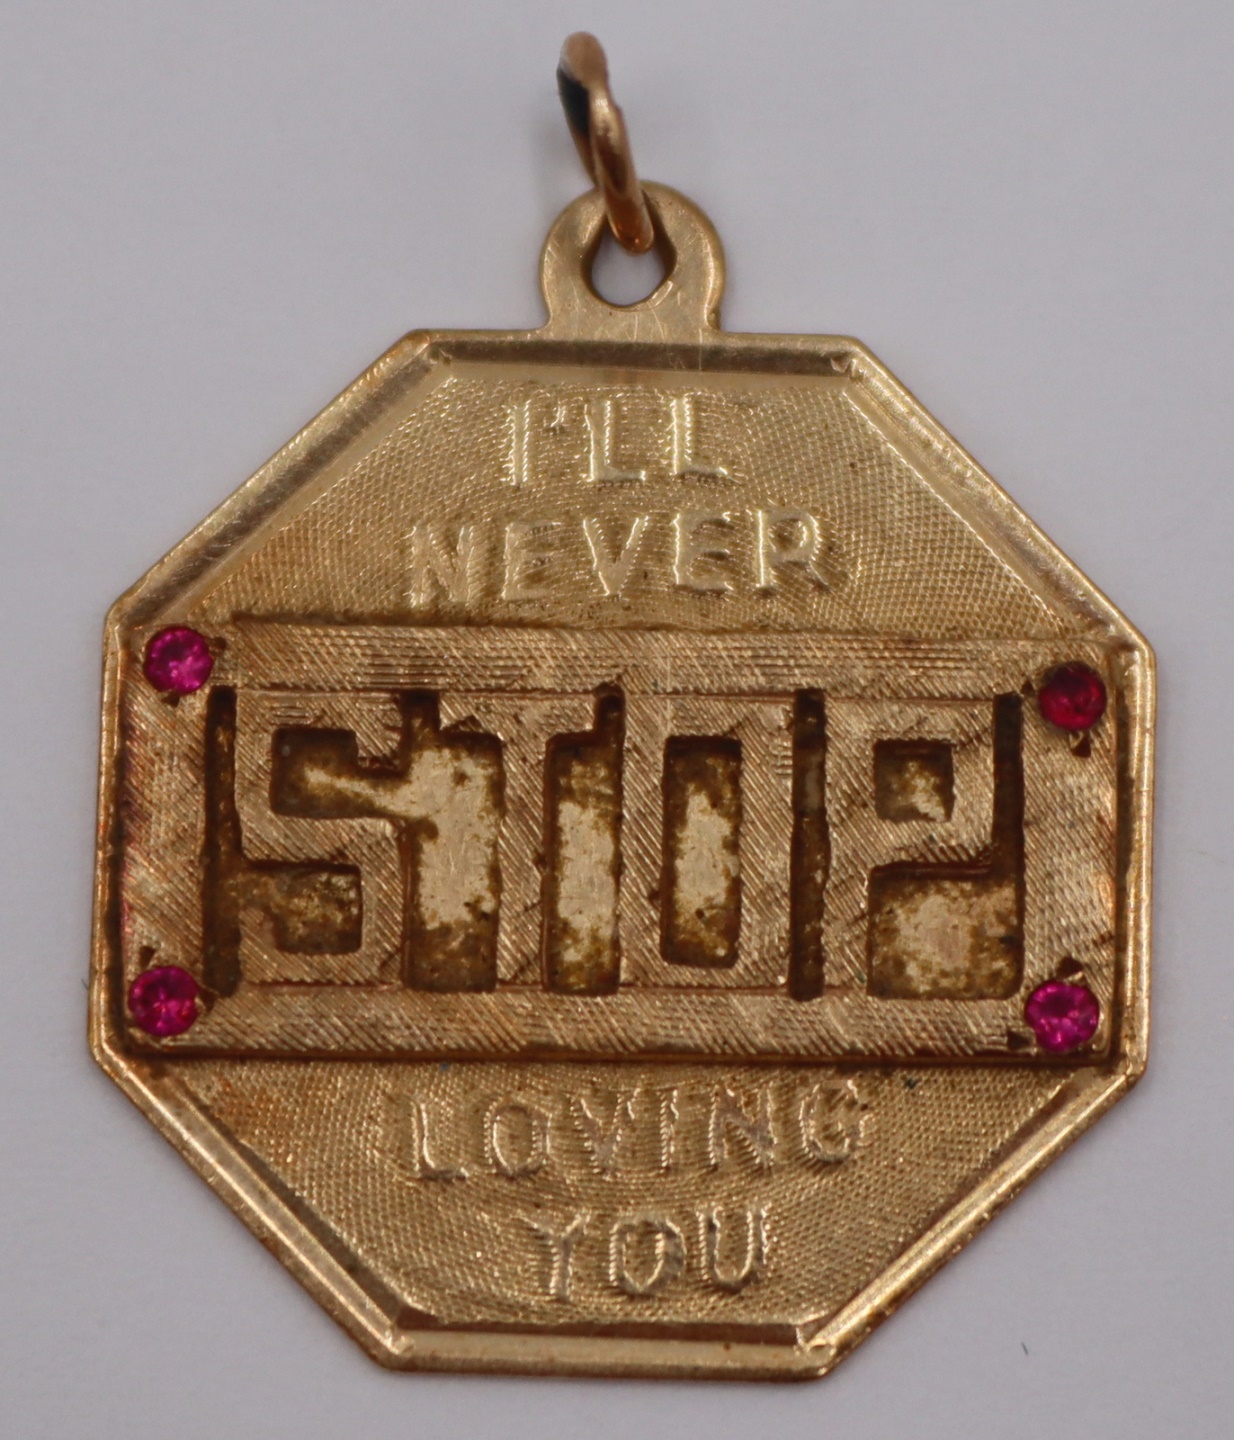 JEWELRY. 14KT GOLD "I'LL NEVER